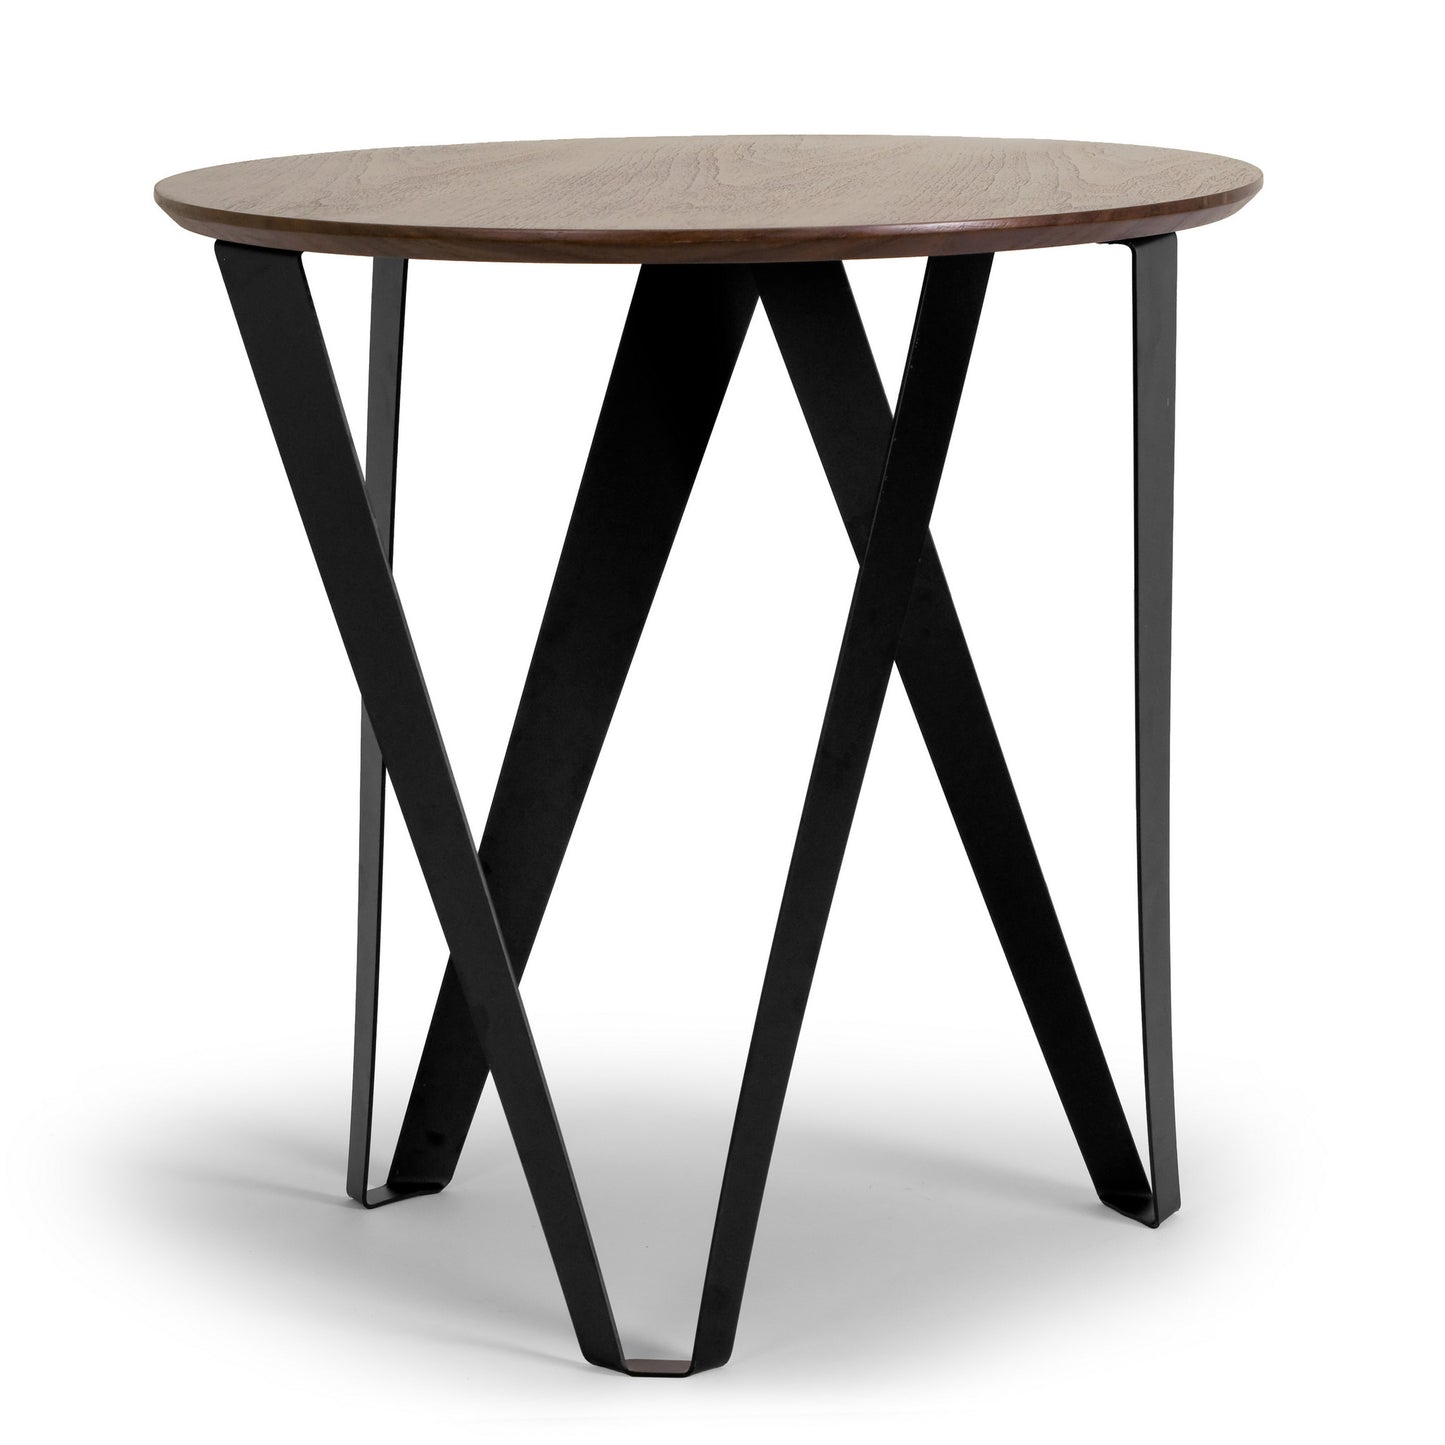 Aimi Walnut Color Round Modern Side Table with Black Metal Legs